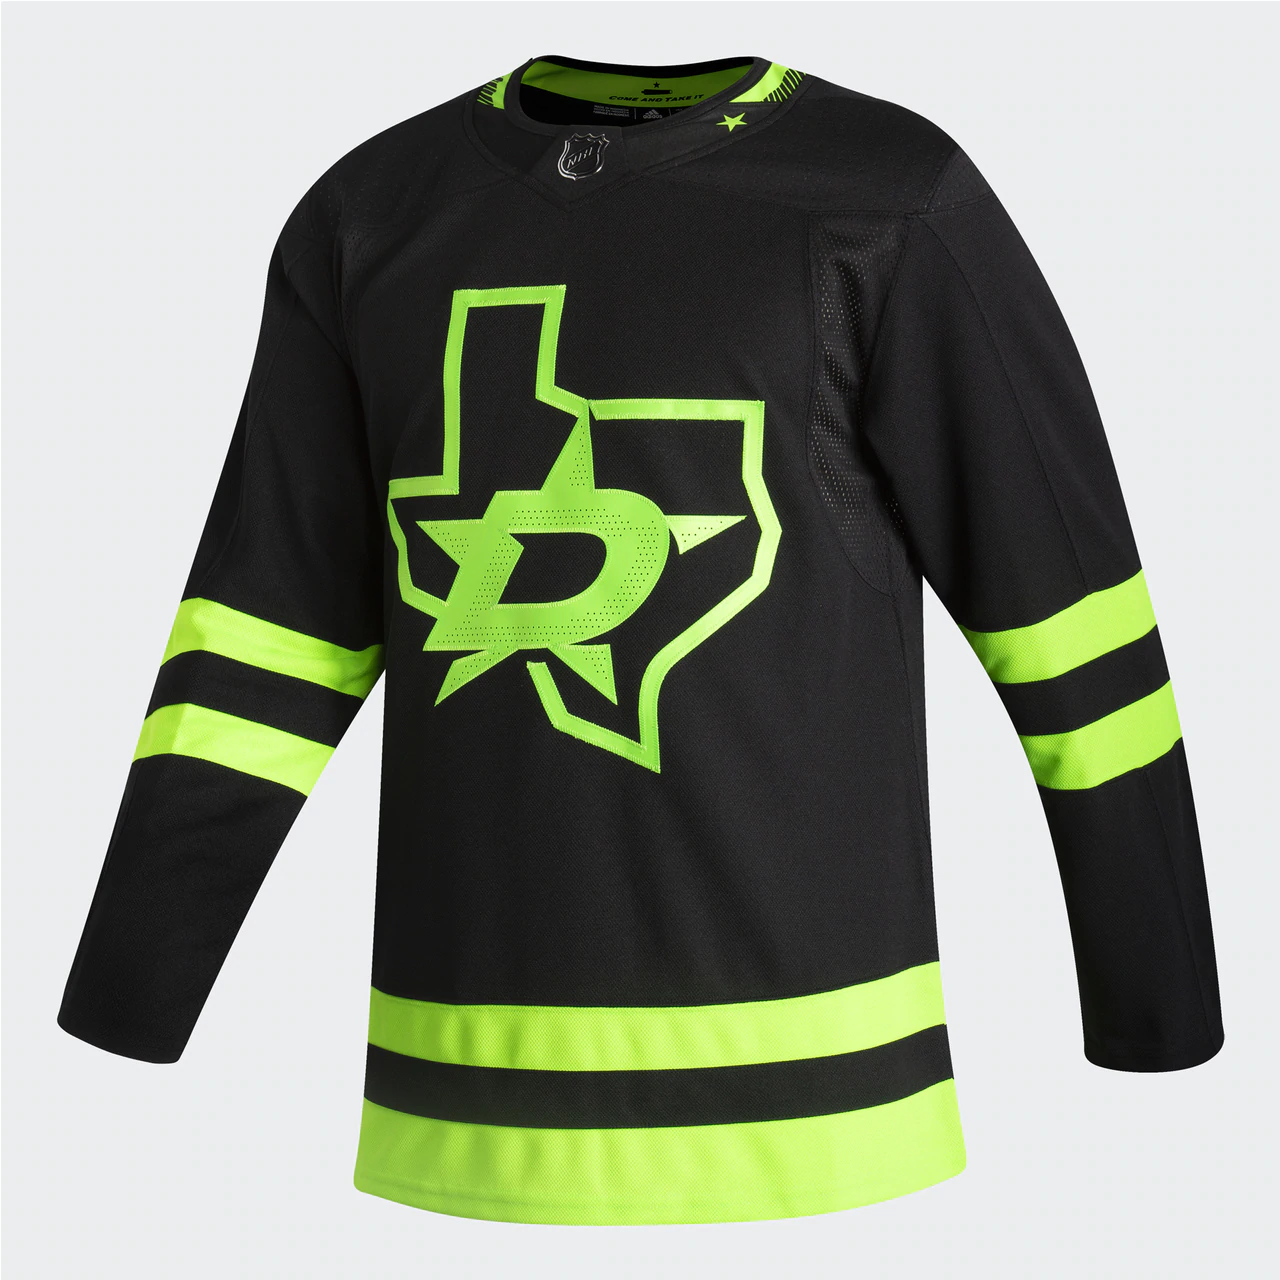 Dallas Stars Adidas Blackout 3rd Authentic Pro Jersey in Black and Green - Front View